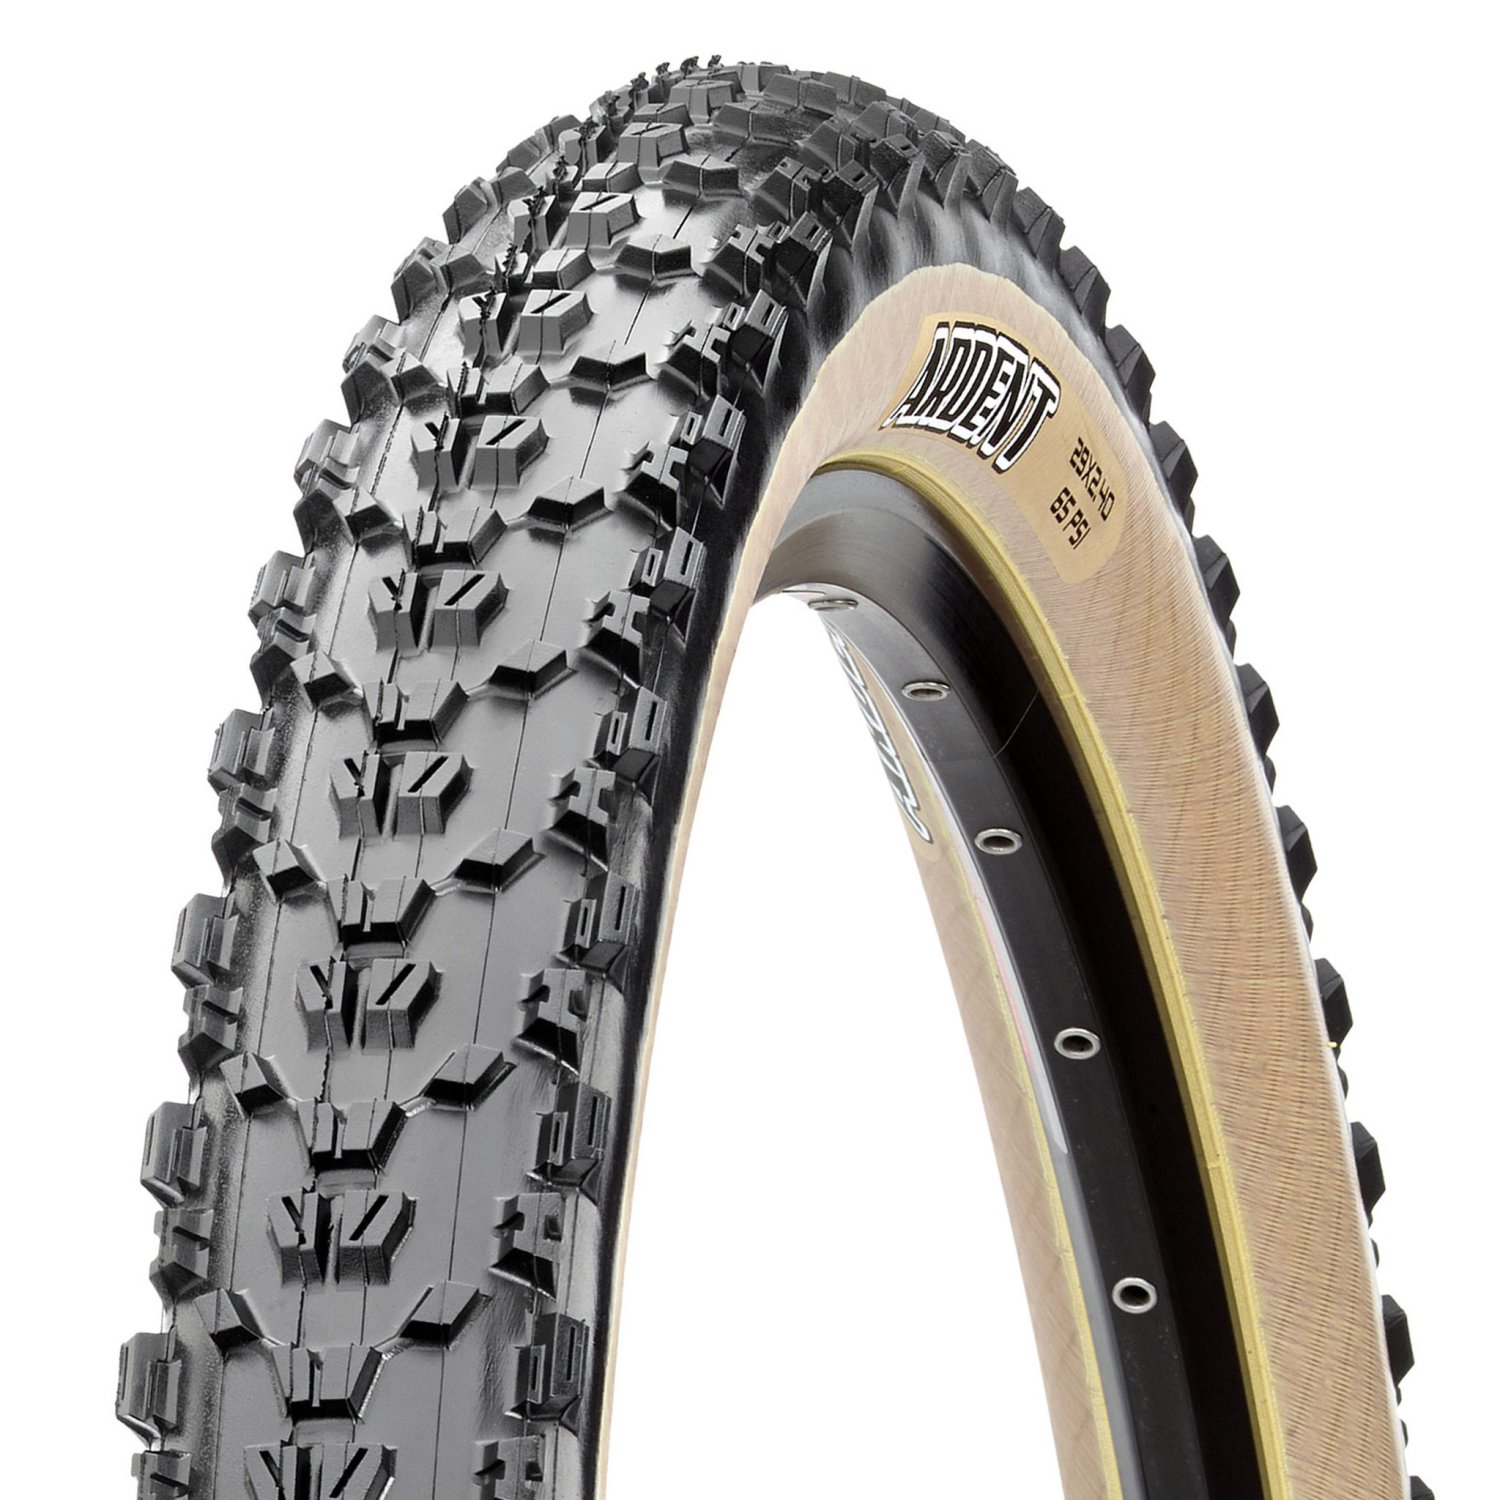 Покрышка велосипедная Maxxis Ardent-Tanwall, 29x2.4, 60 TPI wire 60a, TB96789100